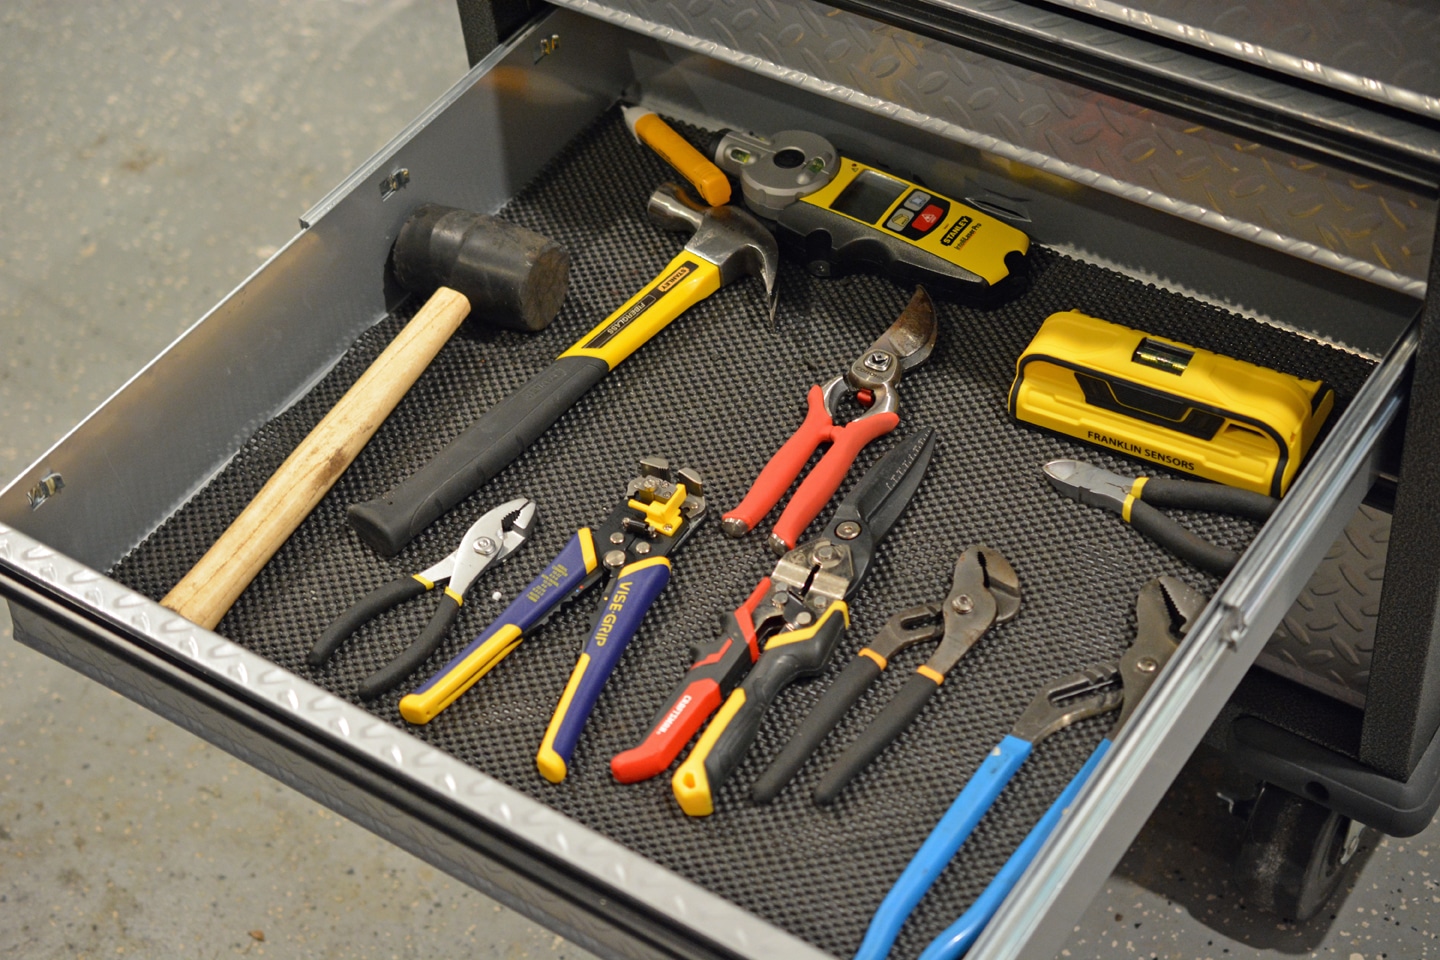 Middle drawer of the Gladiator GearDrawer